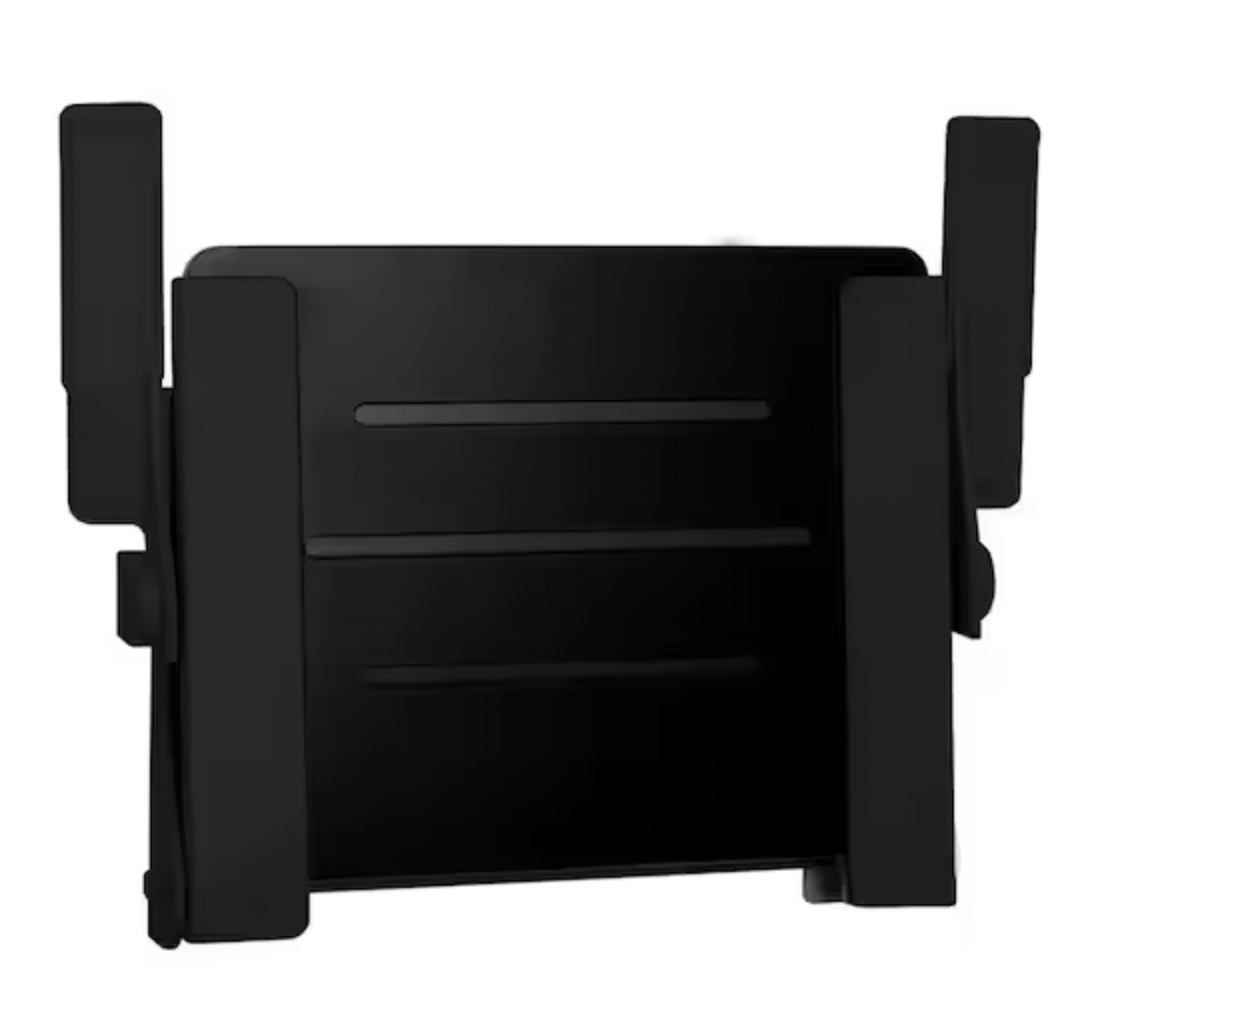 Silhouette Comfort Folding Wall Mount Shower Bench Seat with Arms in Matte Black